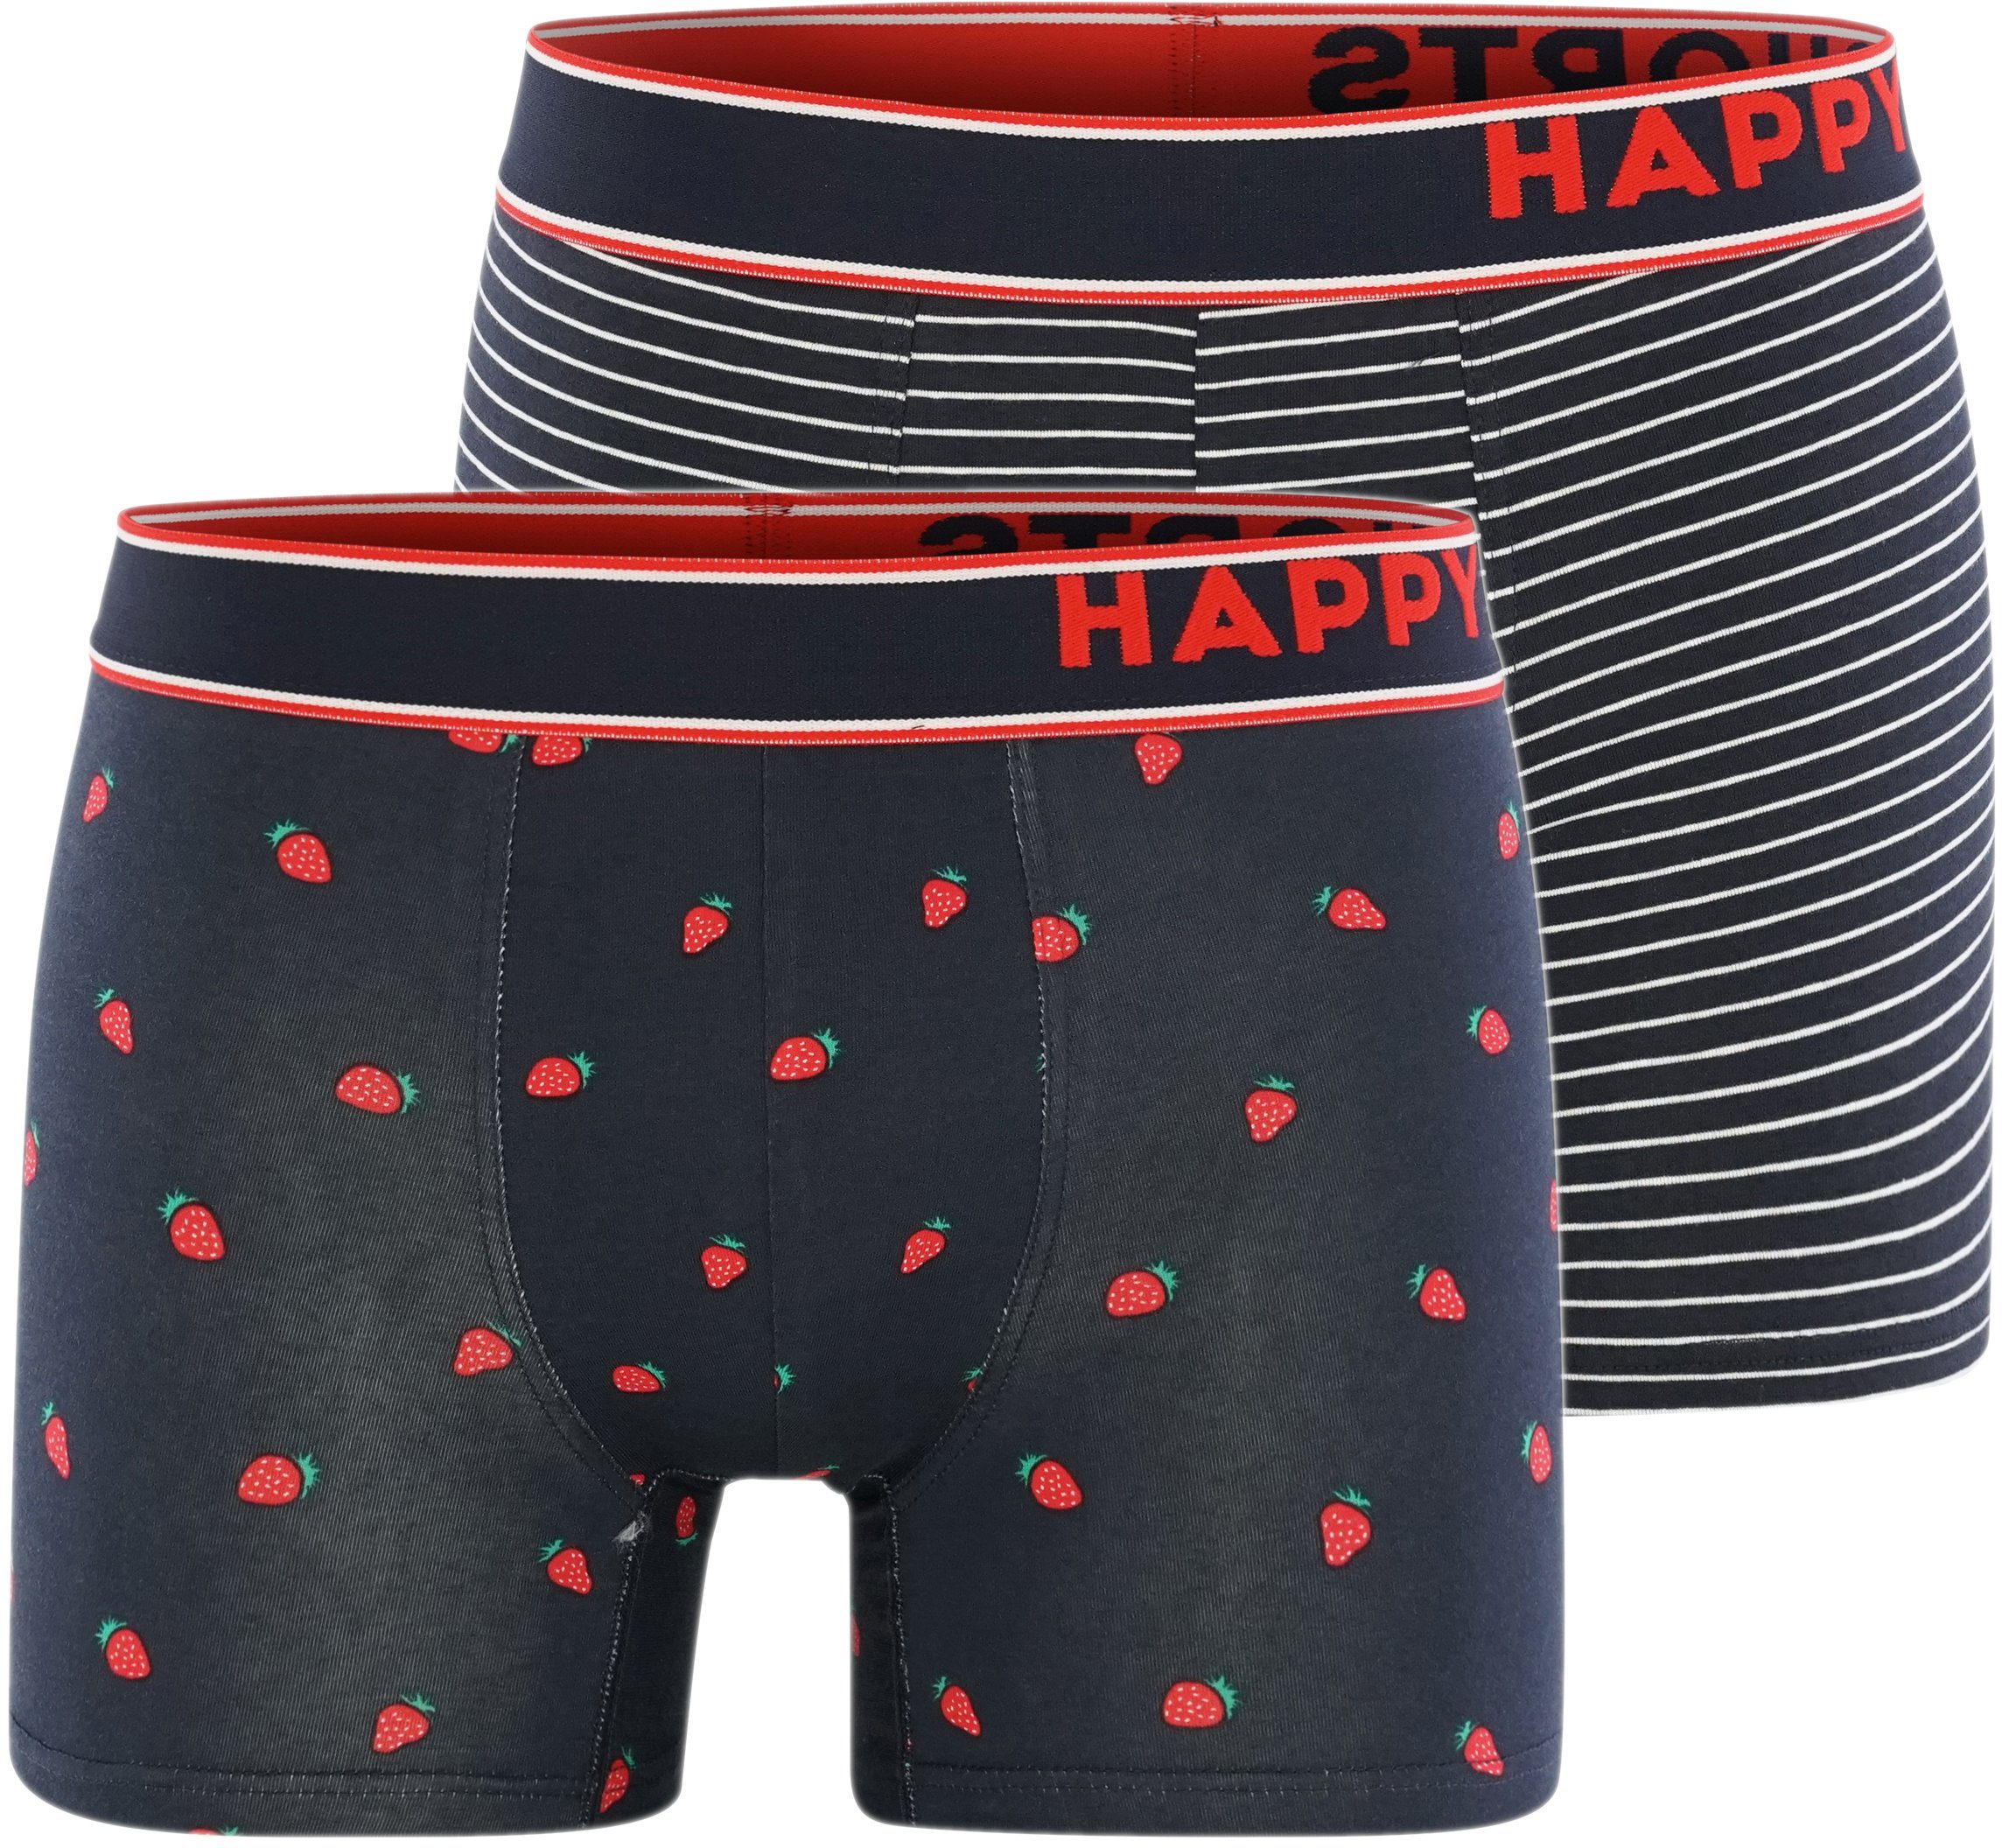 HAPPY SHORTS Retro Pants 2-Pack (2-St) Strawberries and Trunks Stripe